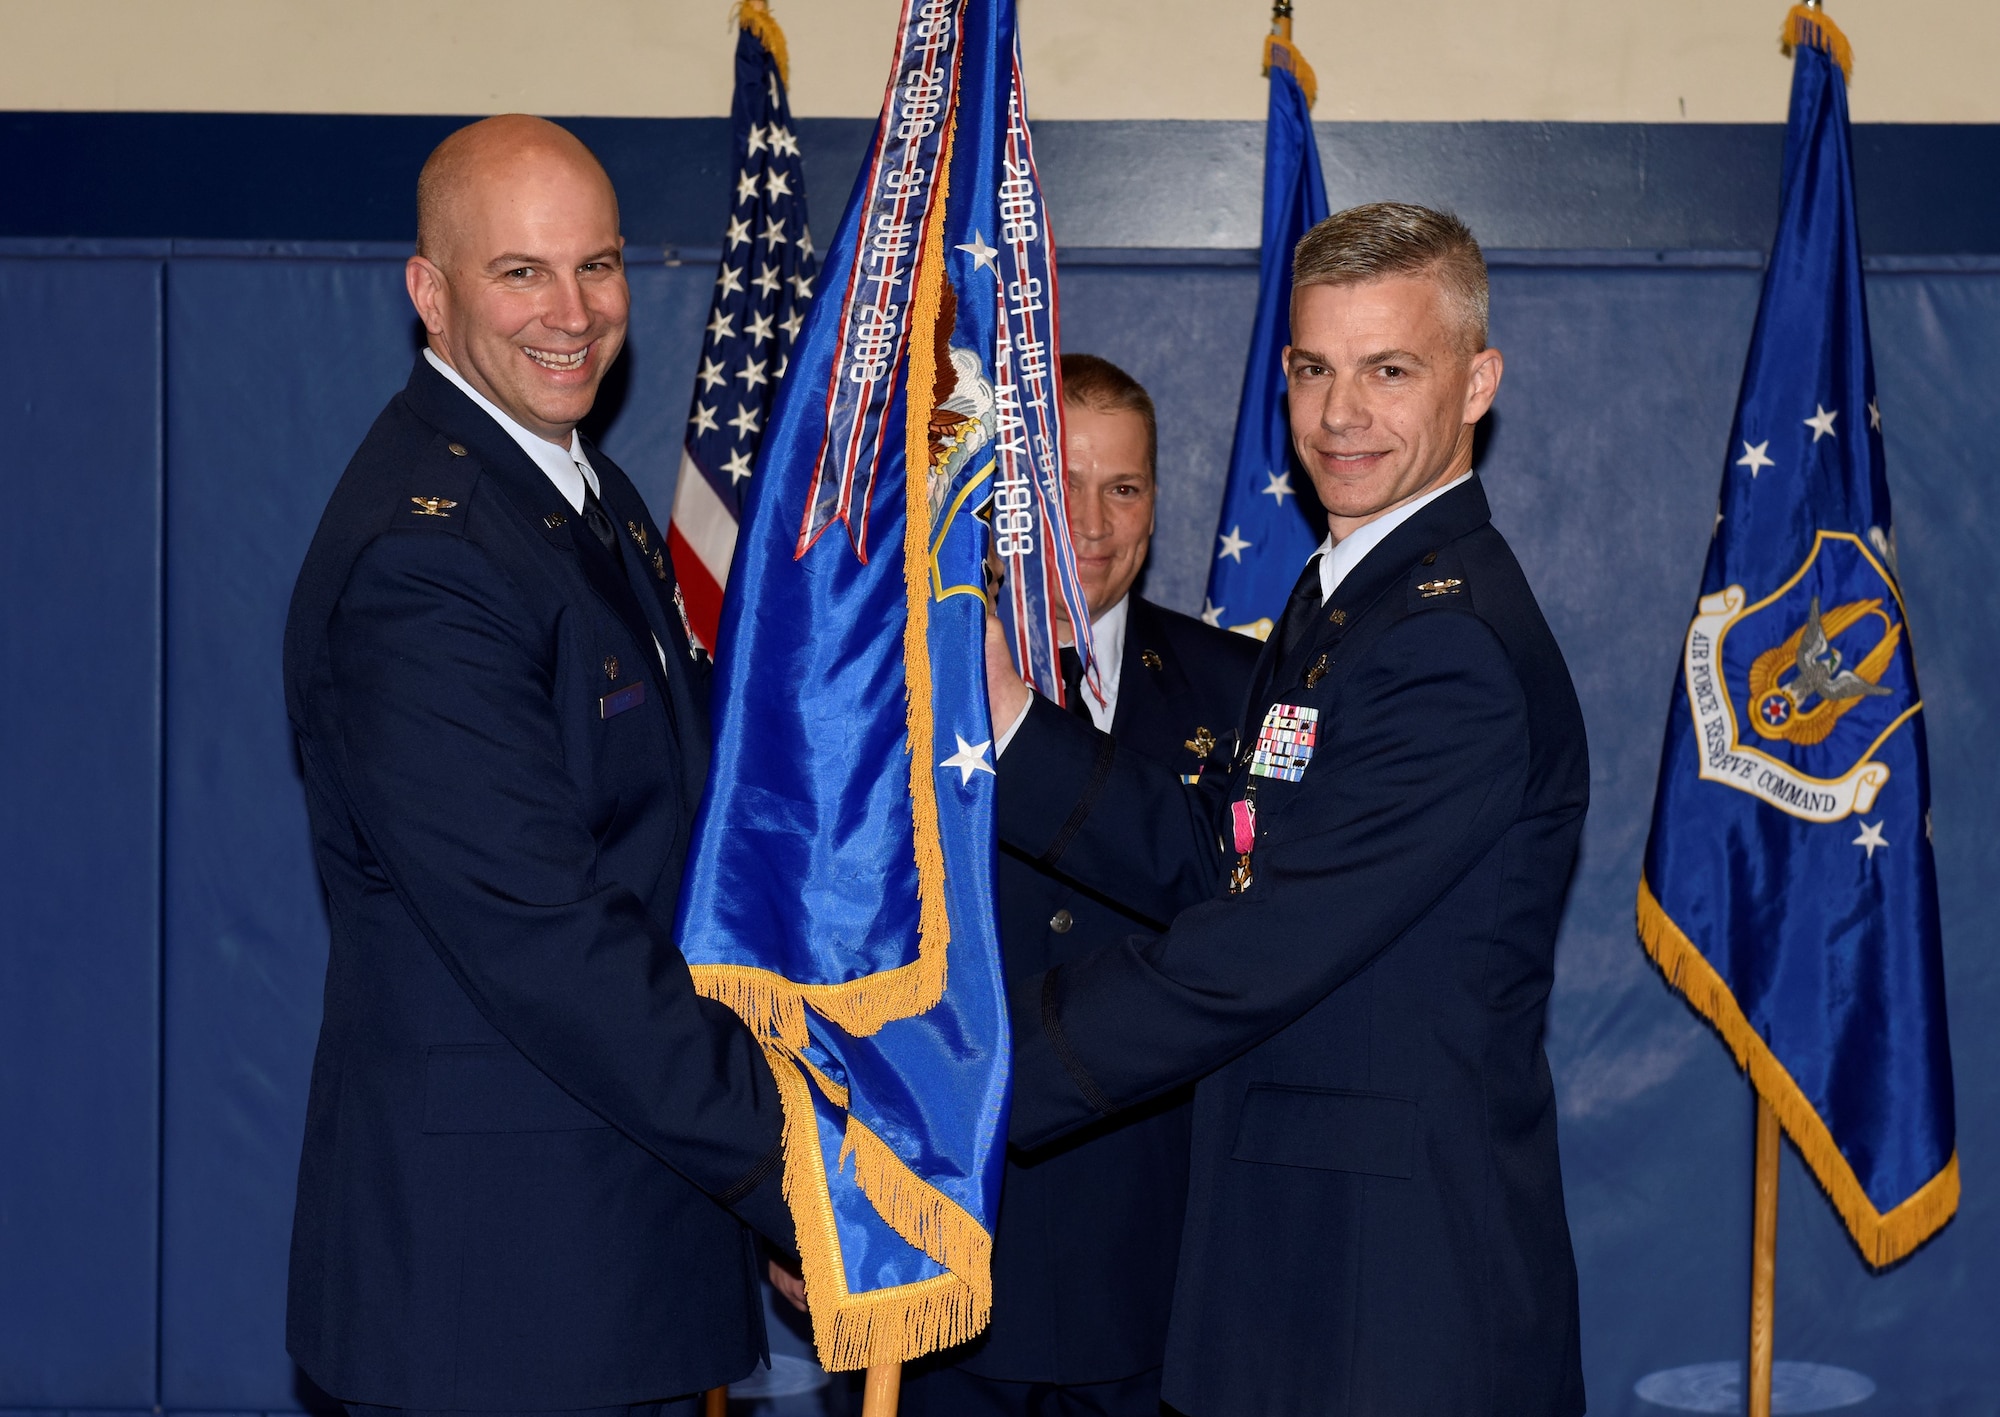 Col. Dean Sniegowski, 310th Space Wing commander, receives the 310th Operations Group guidon from Col. Stephen Slade, outgoing 310th OG commander, during a change of command ceremony Saturday, Jan. 5th, 2019.